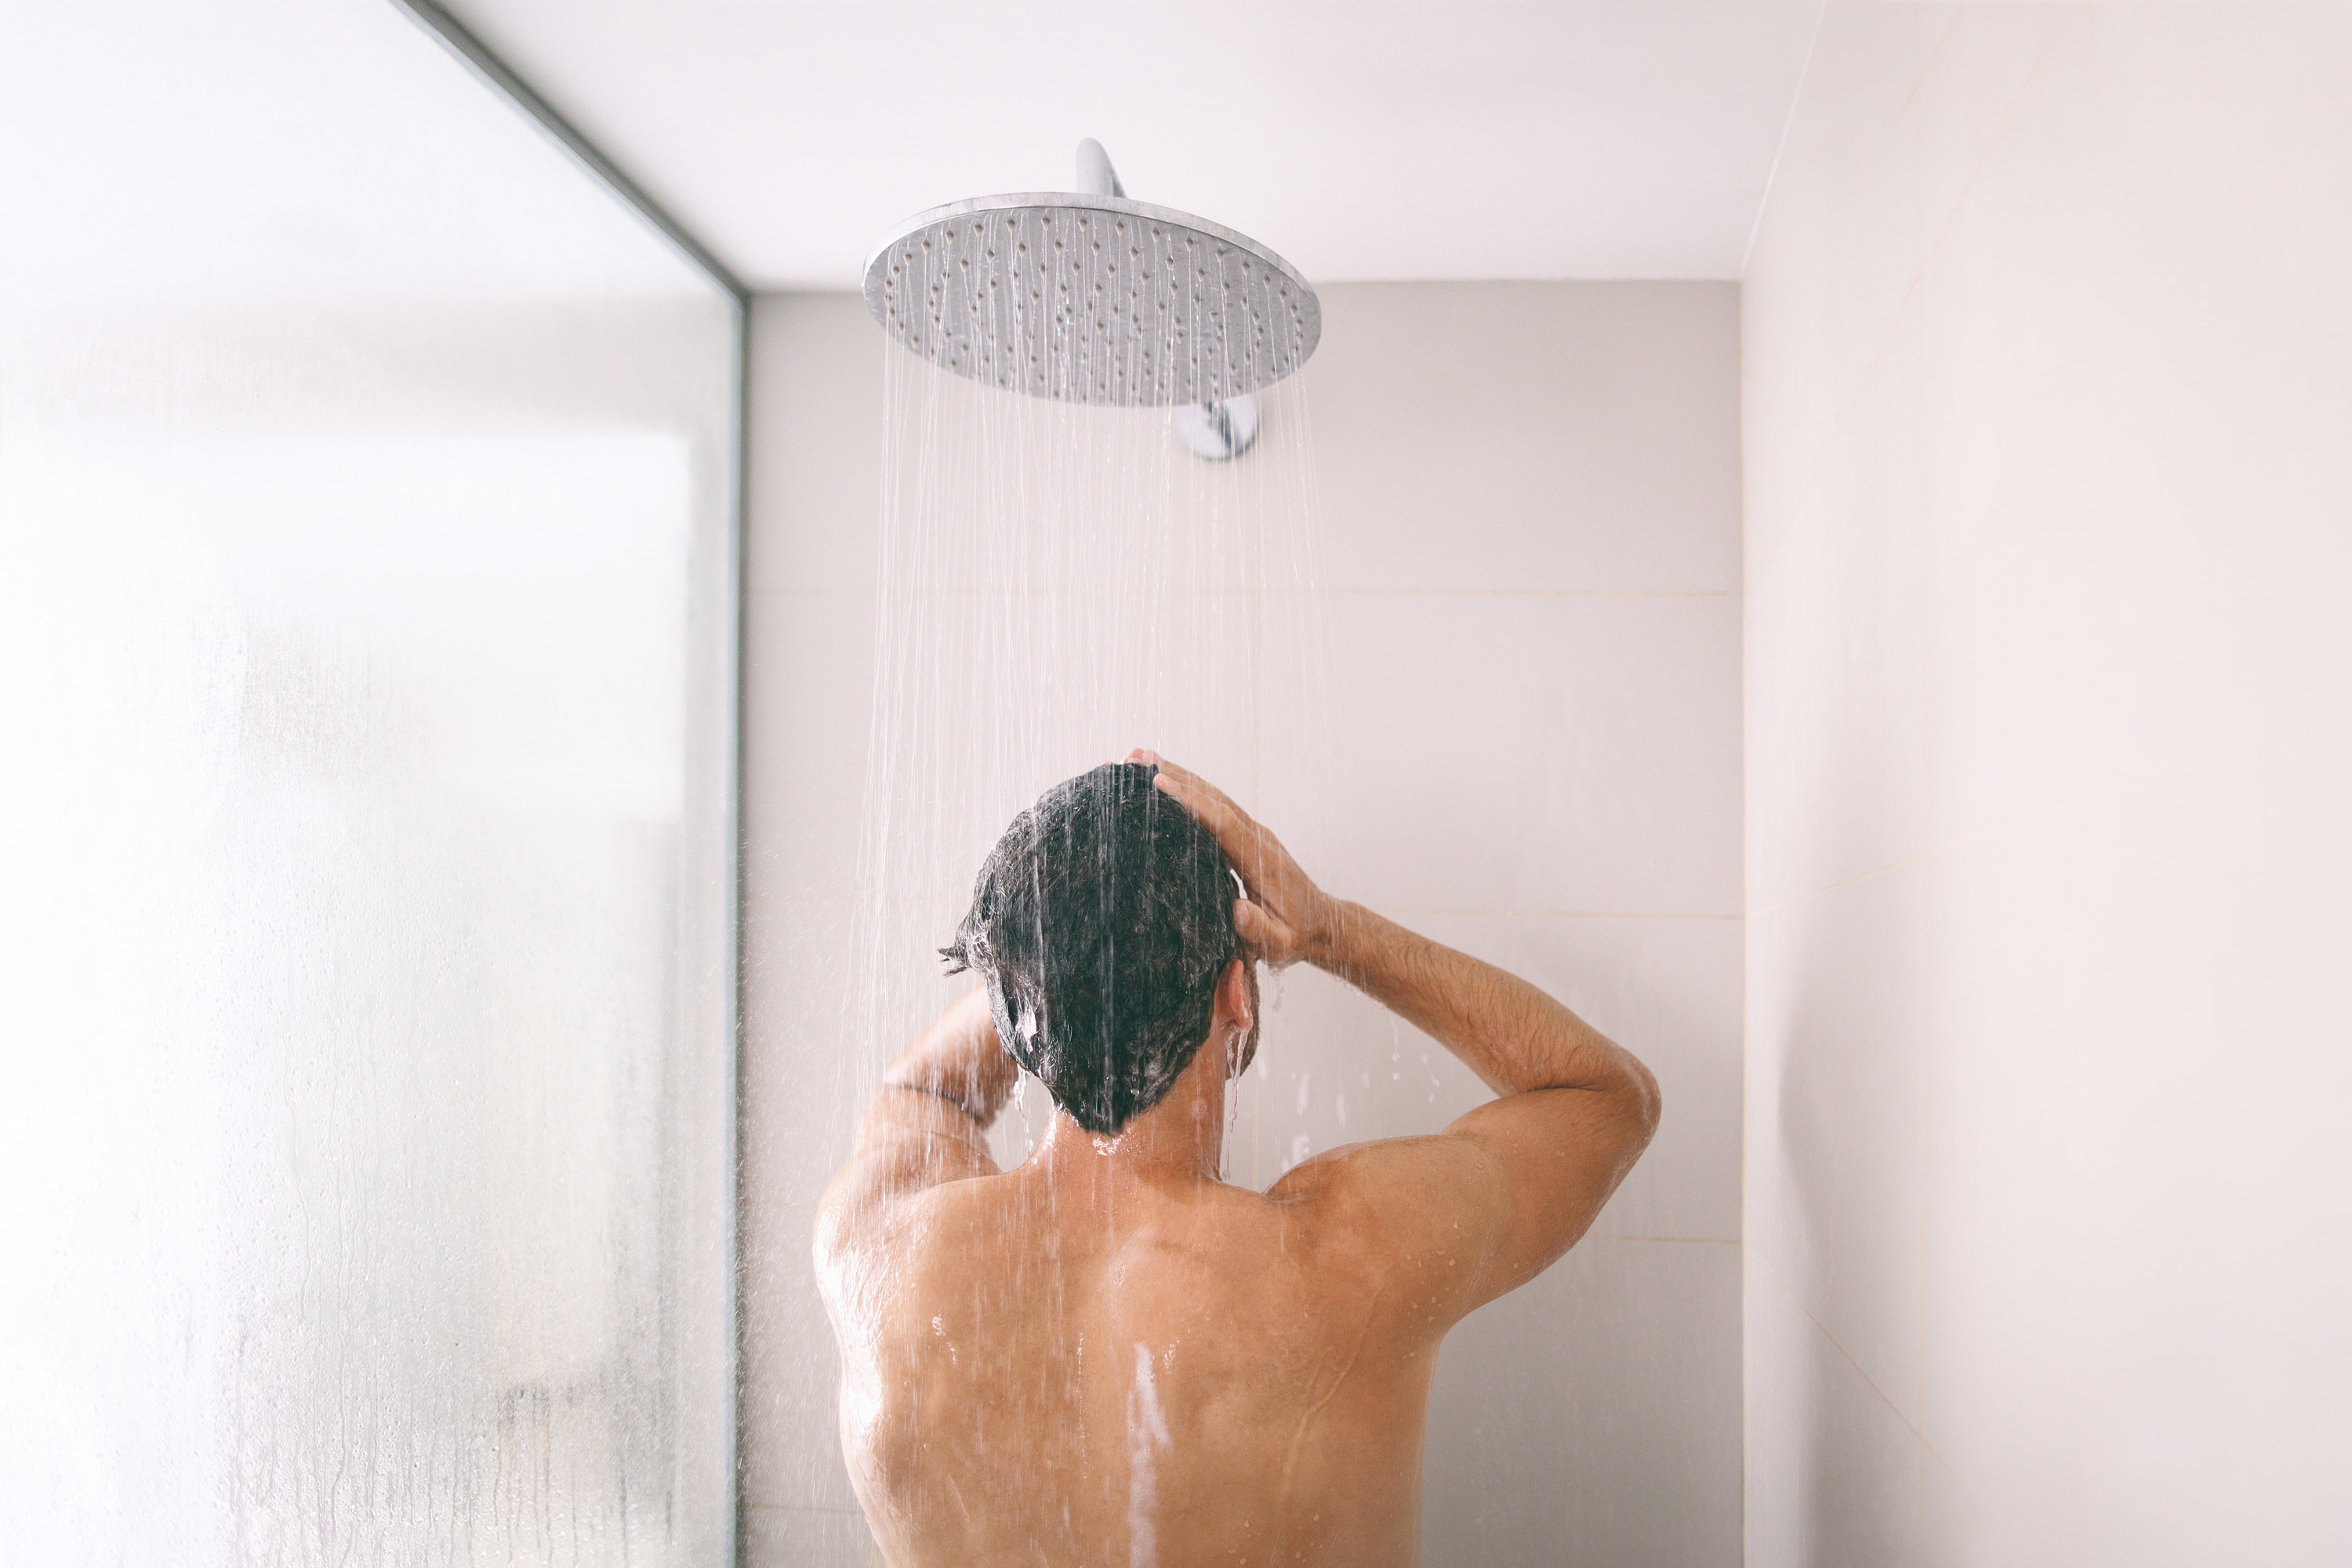 The back of a man washing his hair in the shower